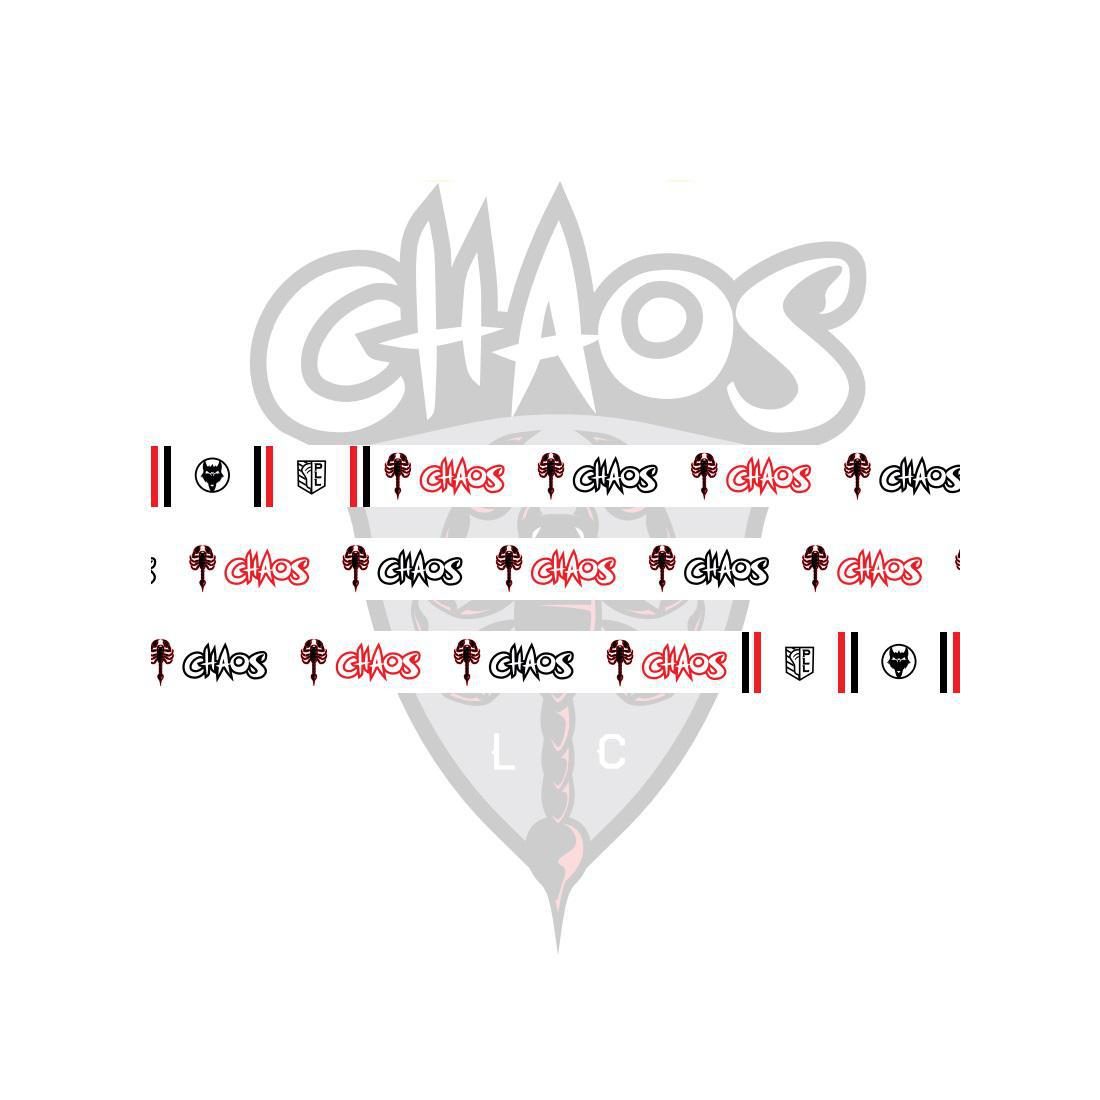 Official Lacrosse Grip Tape of the PLL- Chaos lacrosse, Lax grip tape for PLL